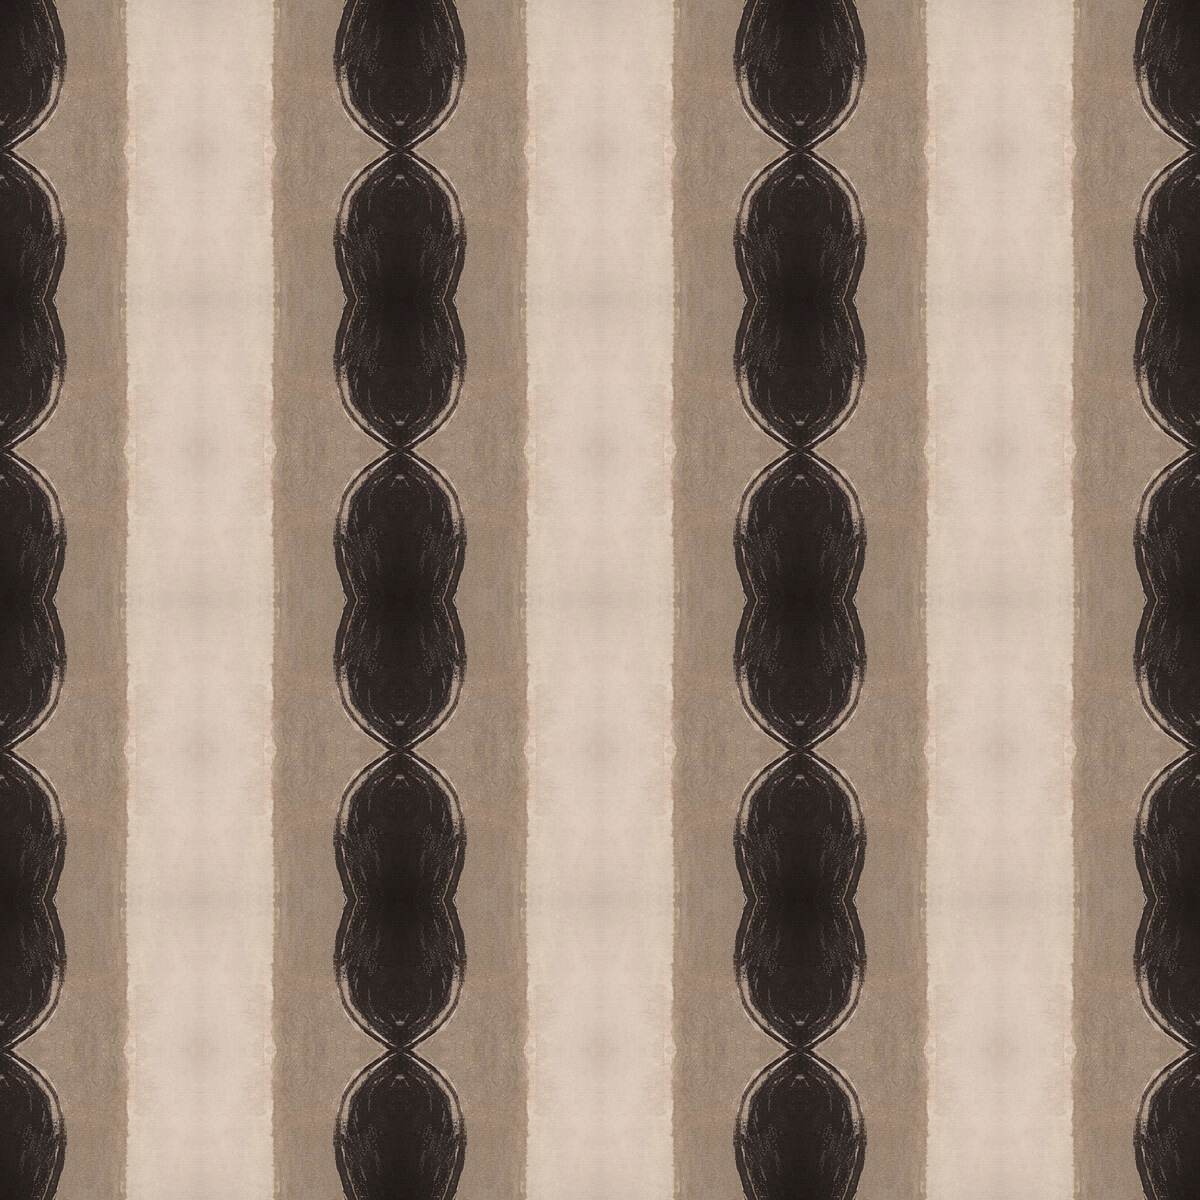 Consumation pattern in black and gray